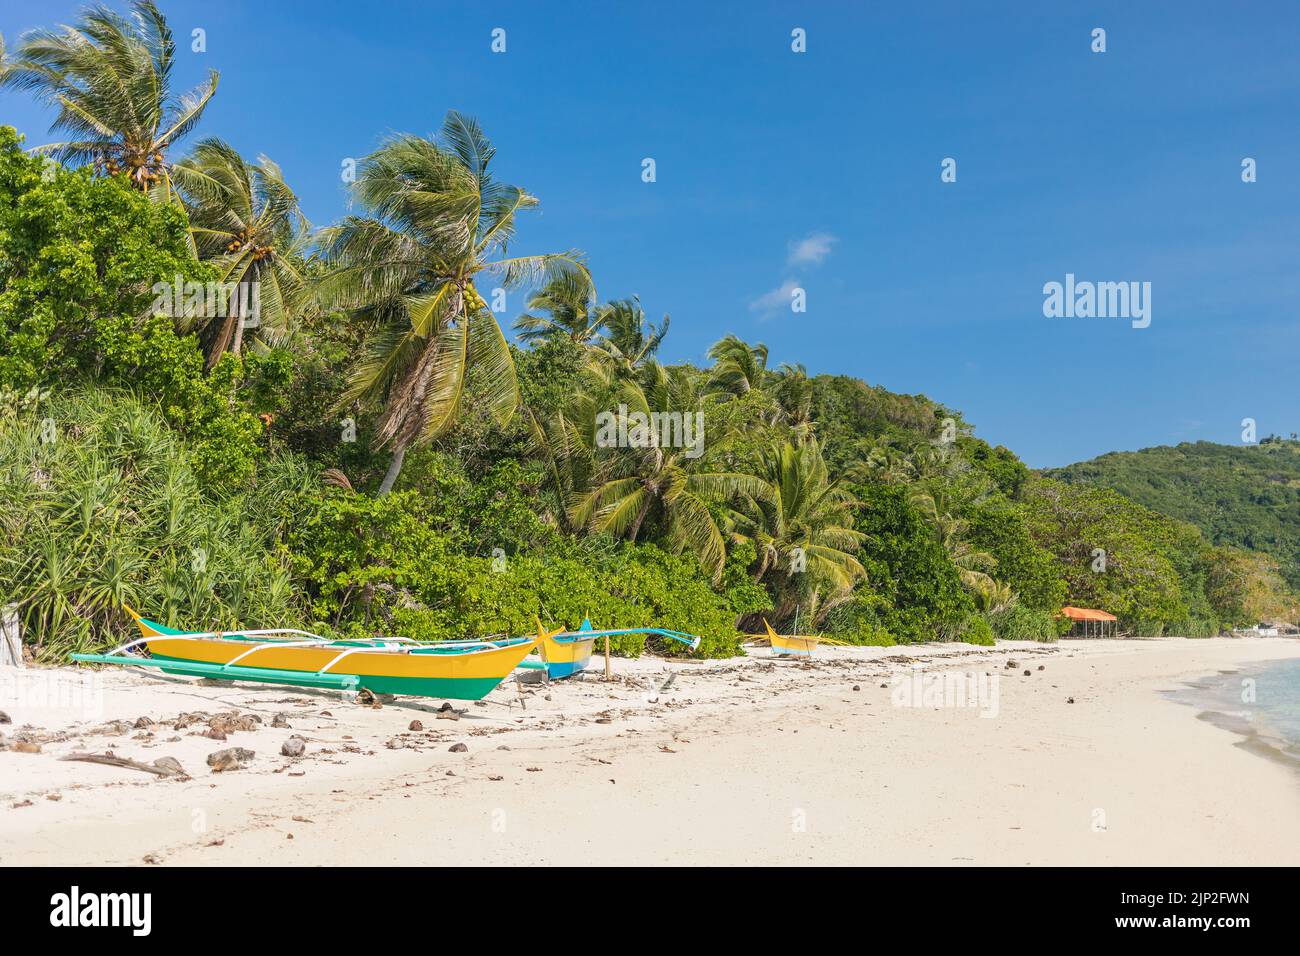 A natural view of wooden boats at the beach of Romblon, Philippines during summer Stock Photo